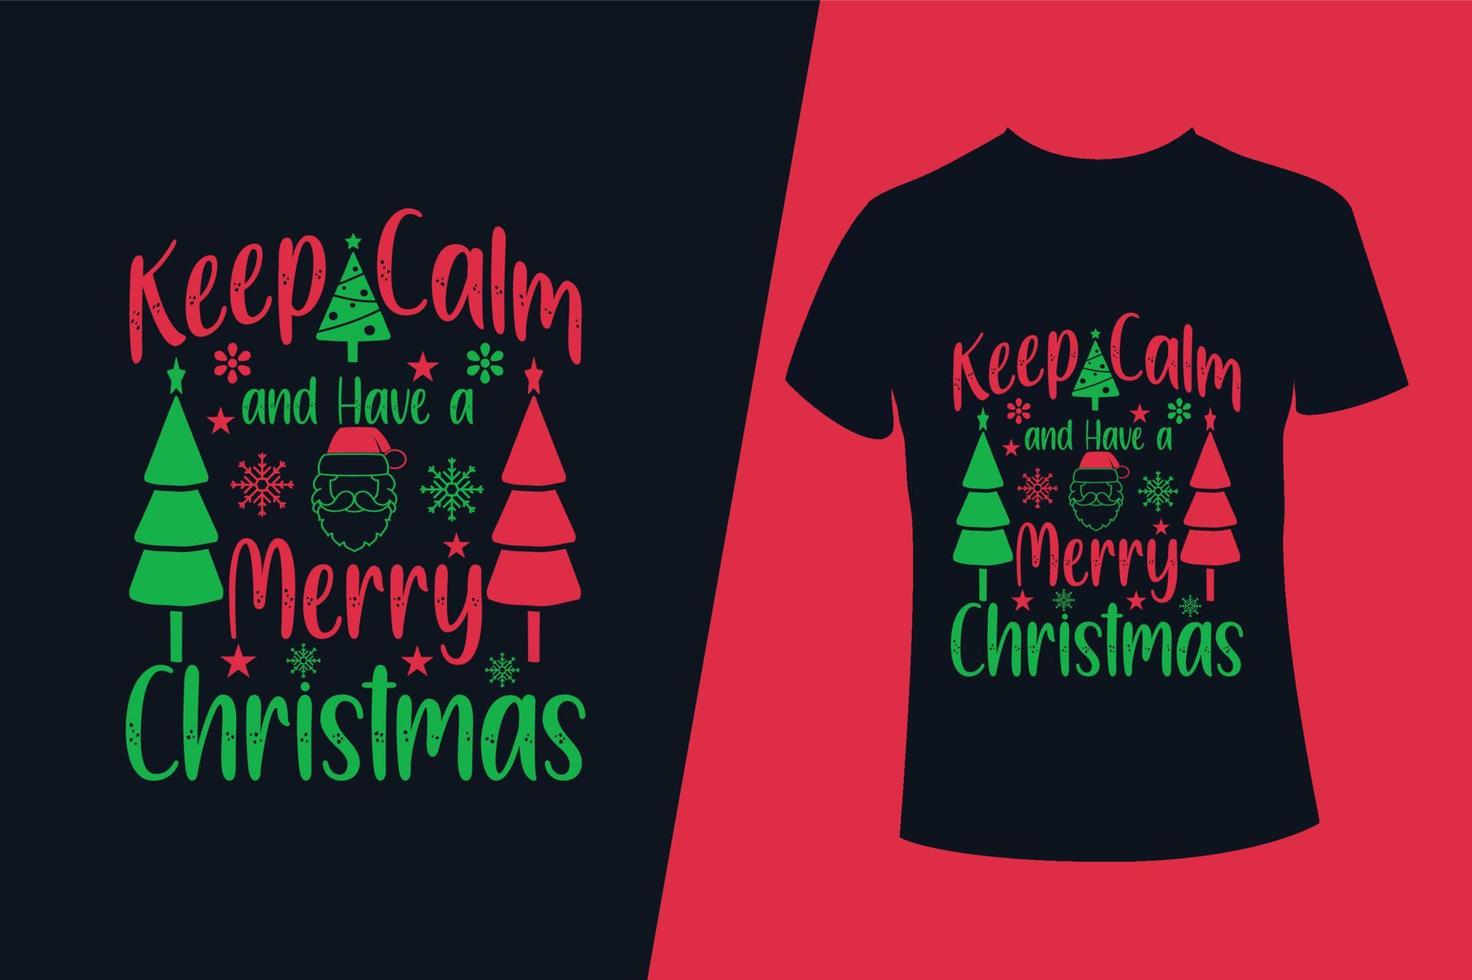 Merry Christmas T-Shirt Design Template for Christmas Celebration. Good for Greeting cards, t-shirts, mugs, and gifts. For Men, Women, and Baby clothing Free Vector